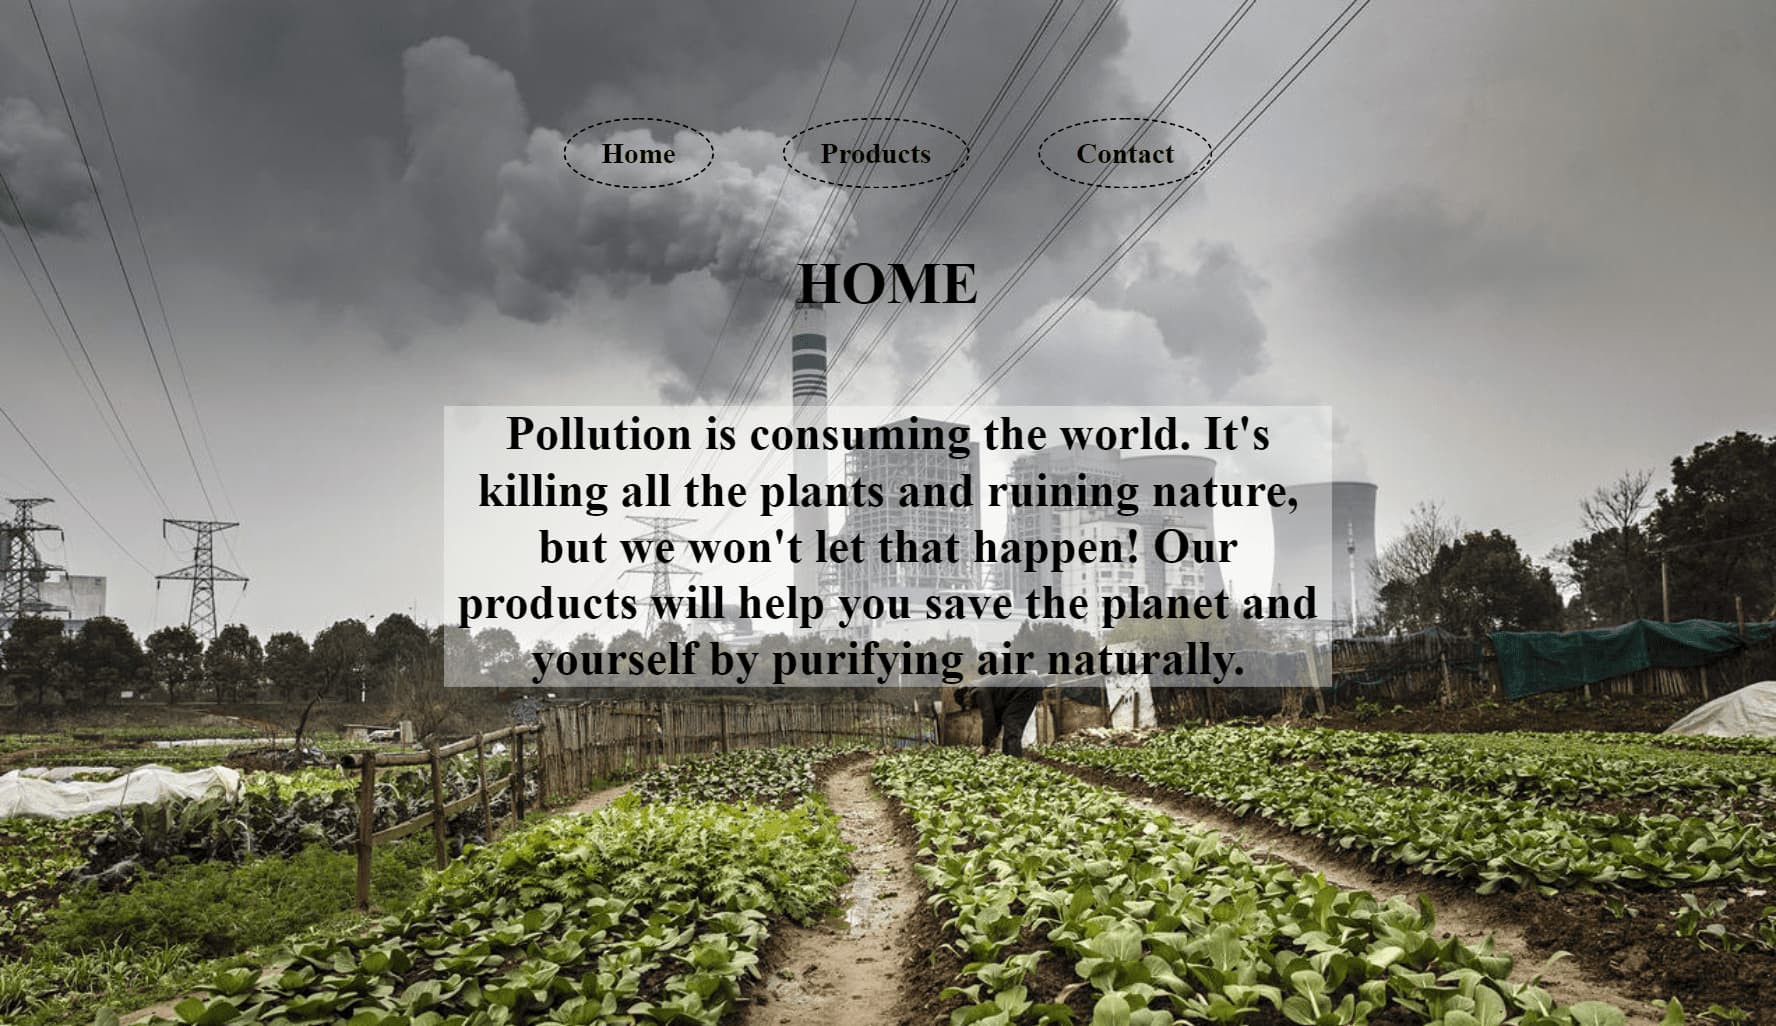 A screenshot of the challenge home page talking about Pollution